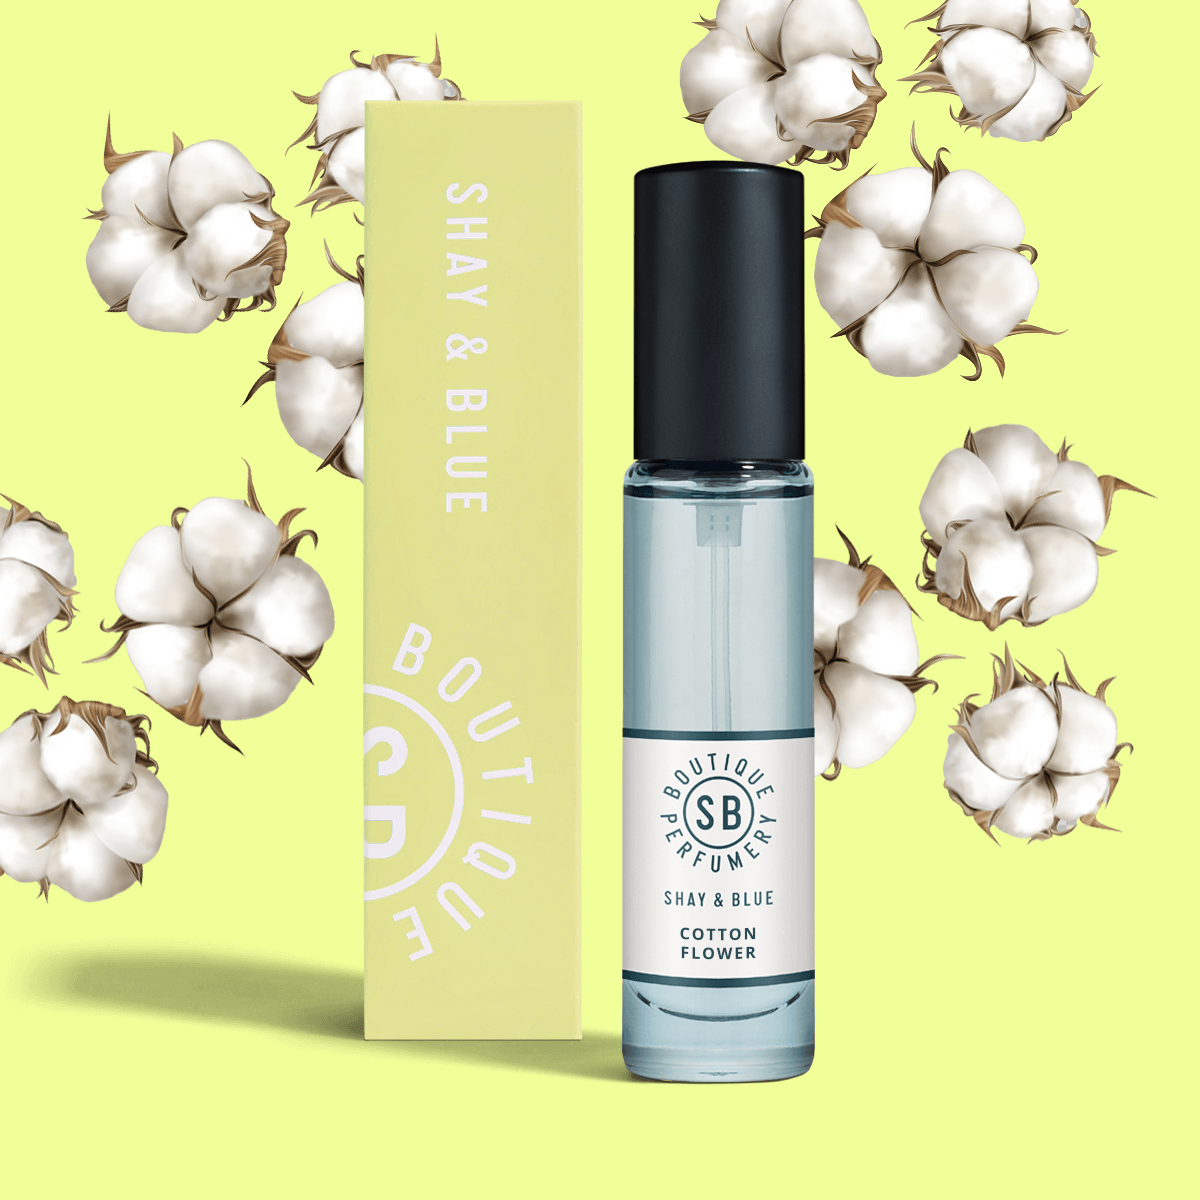 Cotton Flower Limited Edition Fragrance 10ml | Cotton Flower gives free spirited freshness and escapism. Confident Iris breaks from conformity and is soothed with soft Cashmere Woods. | Clean All Gender Fragrance | Shay & Blue